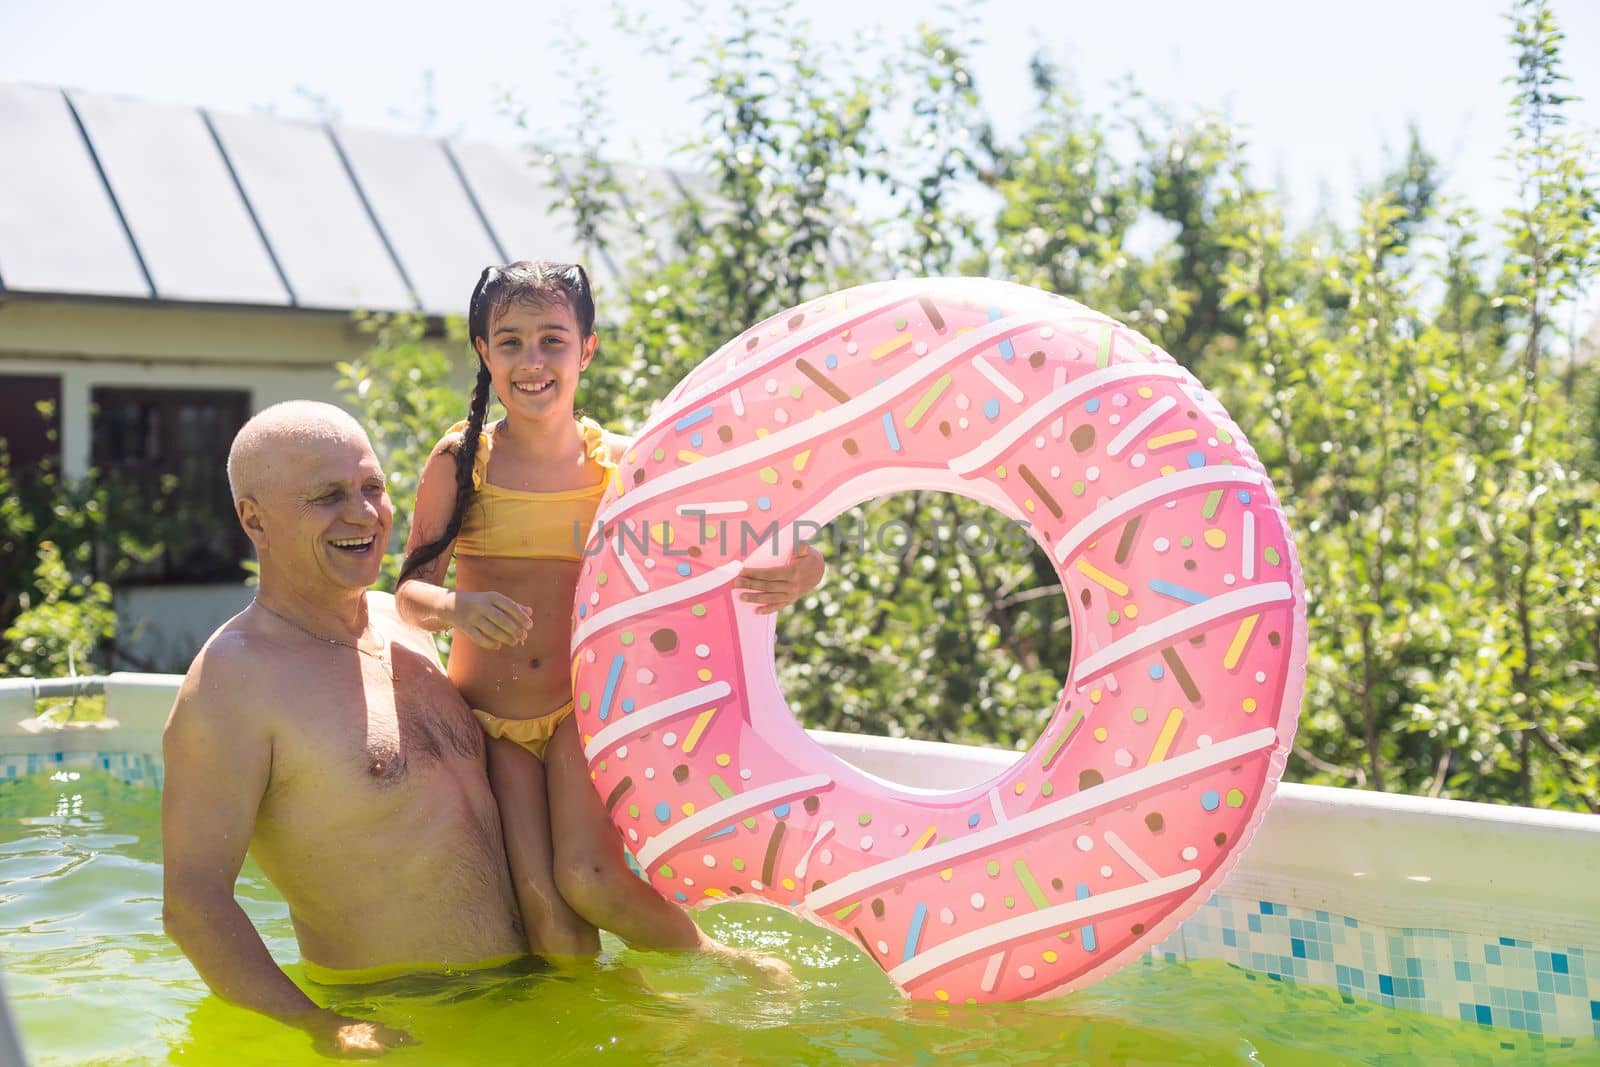 grandfather and granddaughter swimming in the pool in the garden near the house by Andelov13